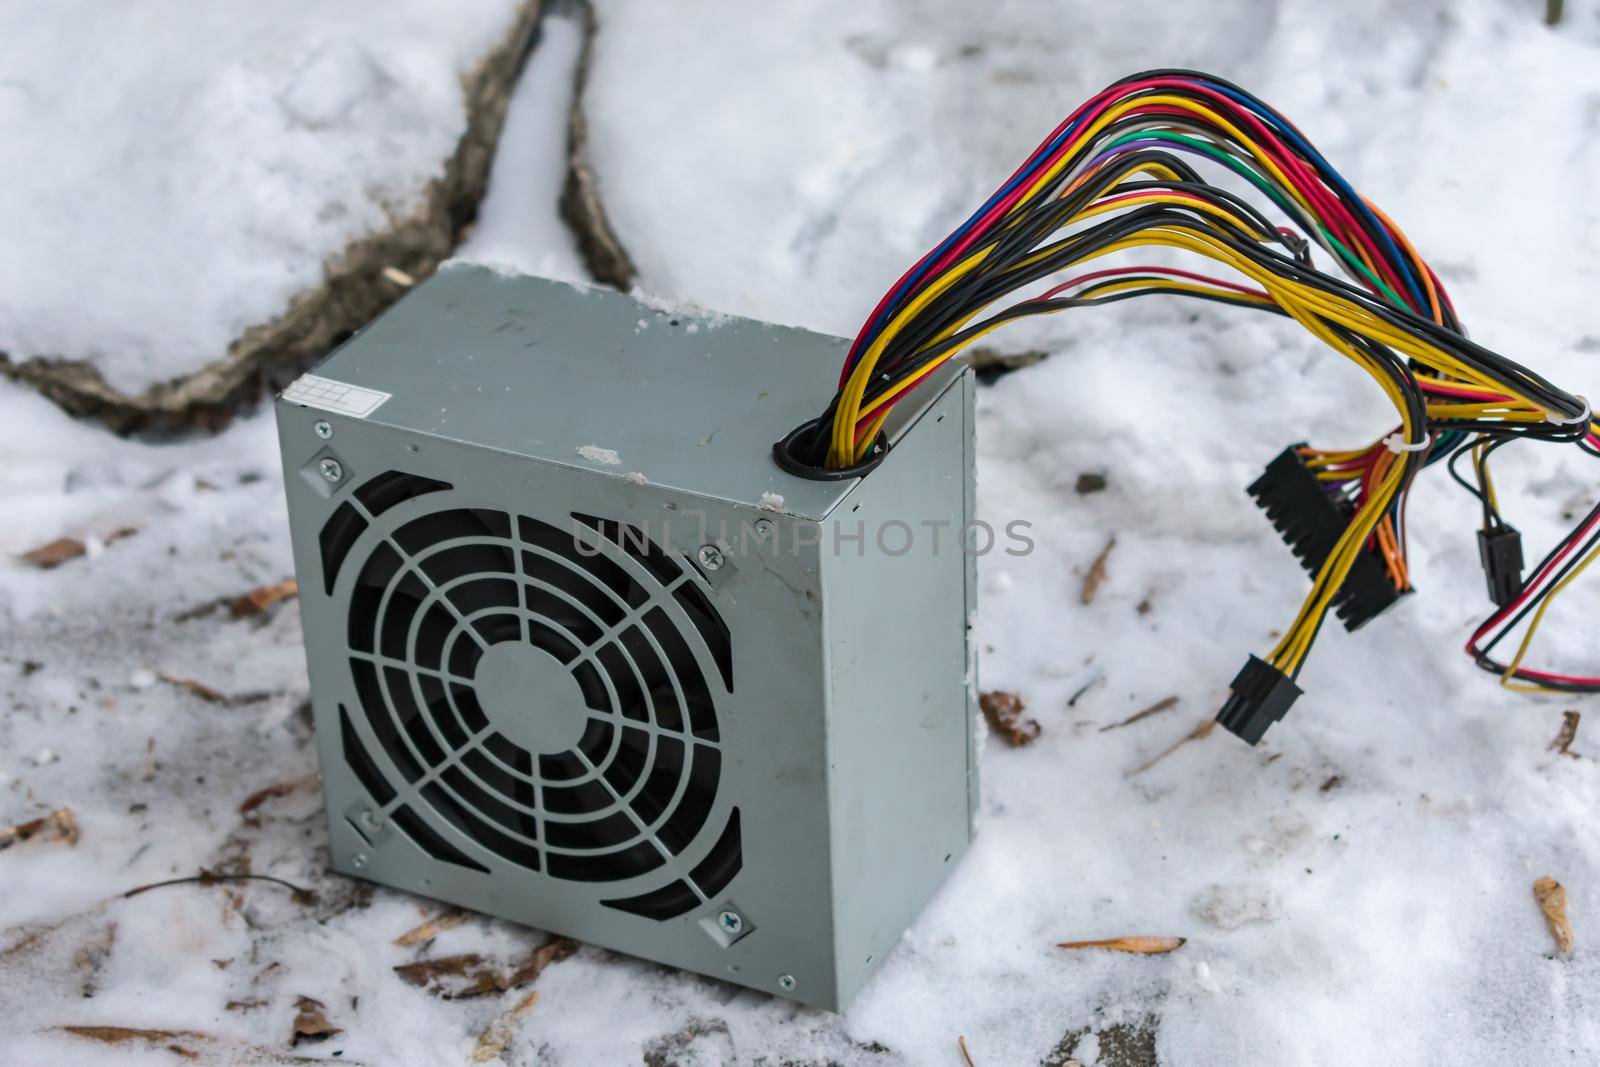 The PC power supply lies at an electronics dump in winter in the snow